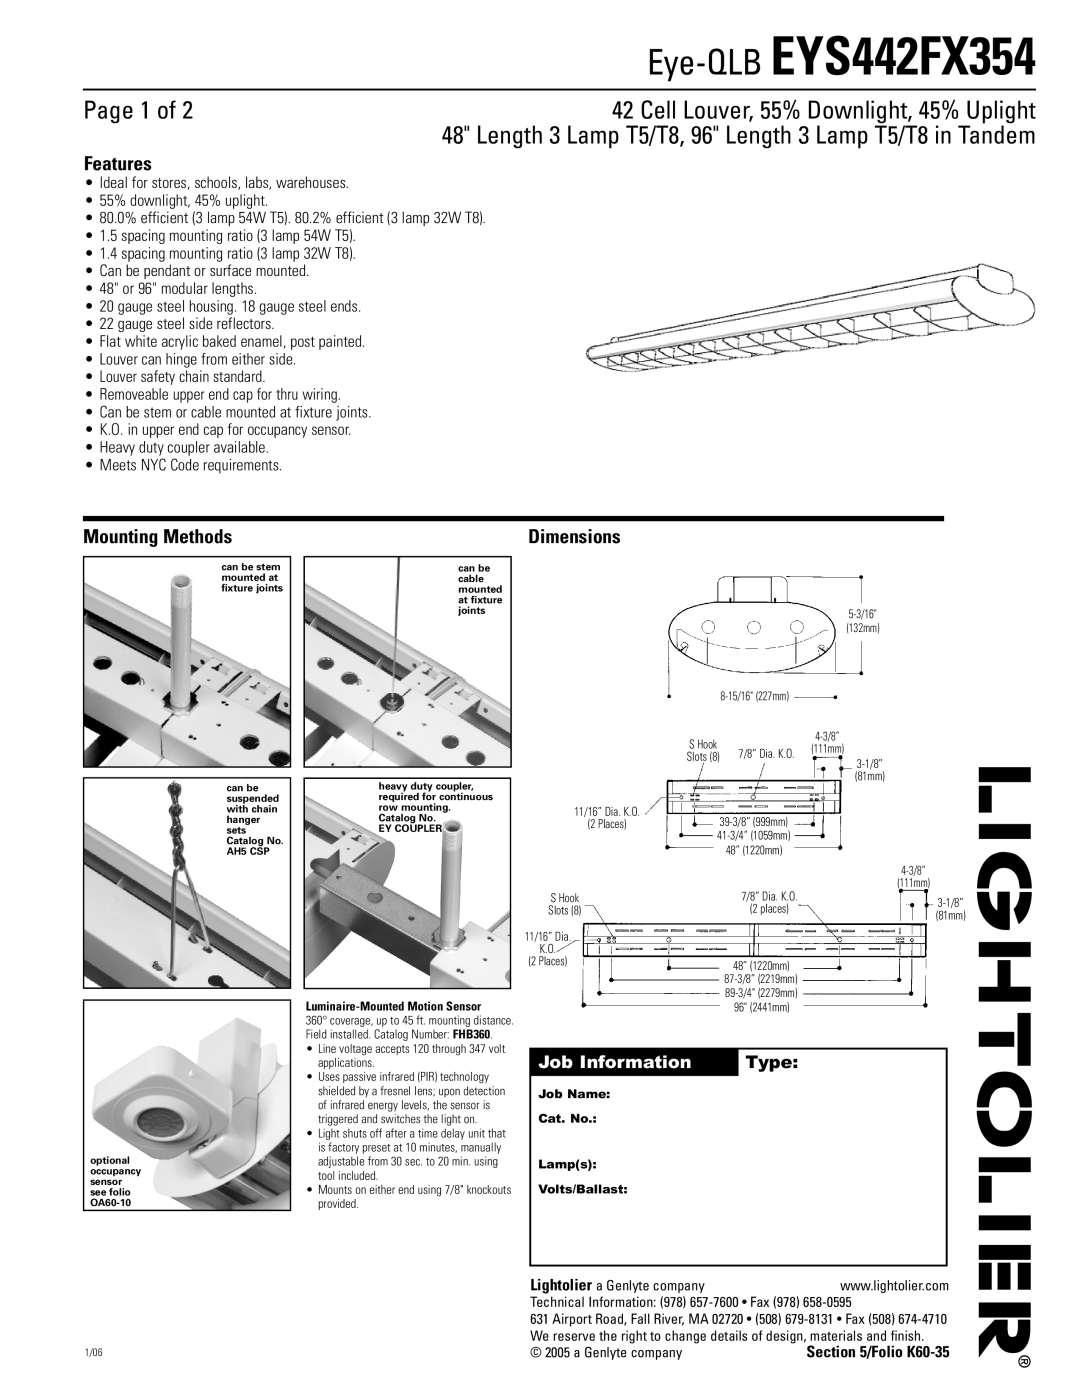 Lightolier EYS442FX354 dimensions Page 1 of, Cell Louver, 55% Downlight, 45% Uplight, Features, Mounting Methods, Type 